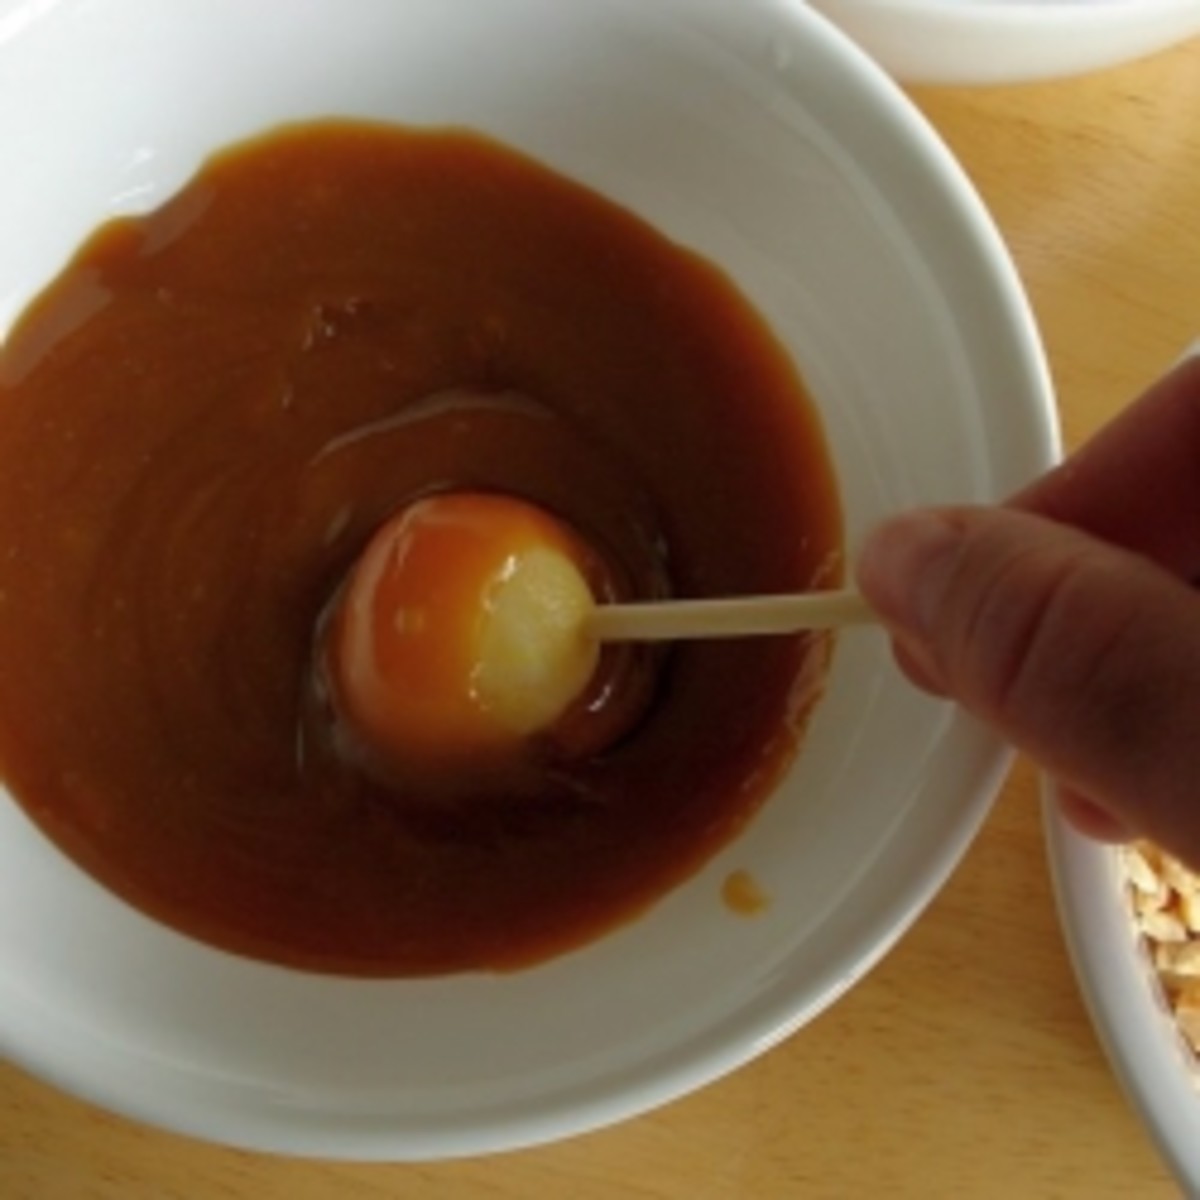 Celebrate The Caramel Apple By Making One!